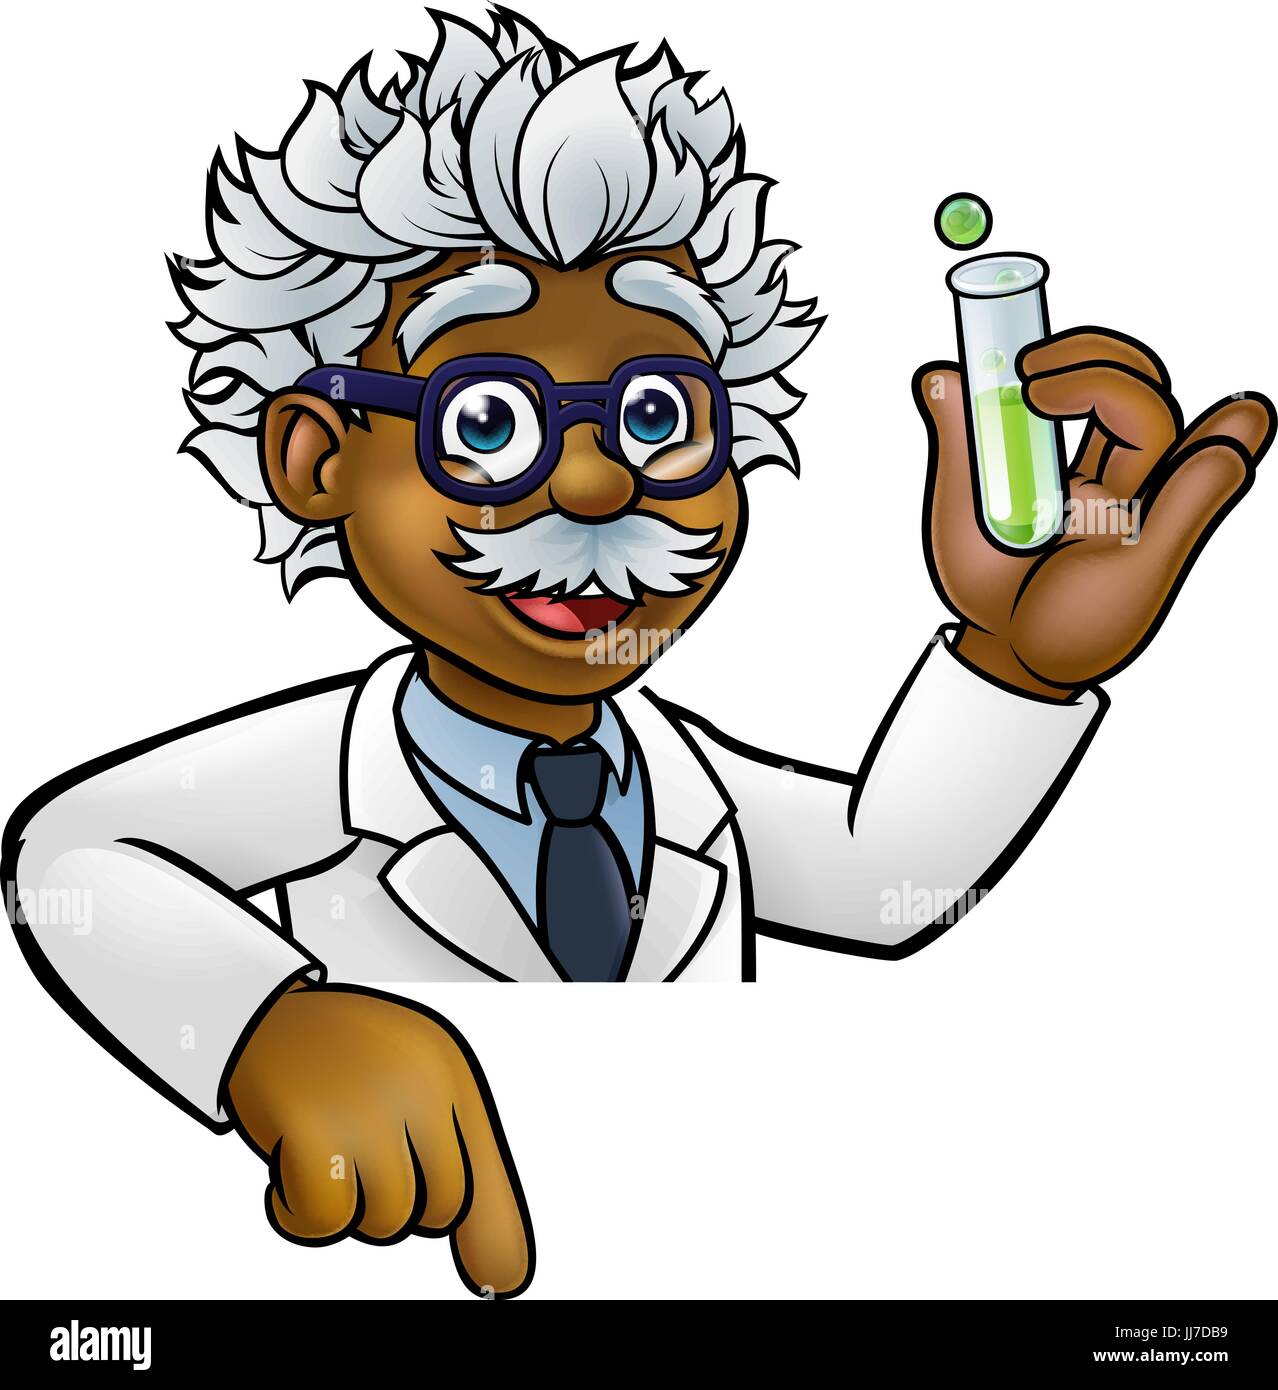 Featured image of post Albert Einstein Funny Cartoon Pictures - About faces entertainment helps you find the best caricature artists and party entertainers for your upcoming event!